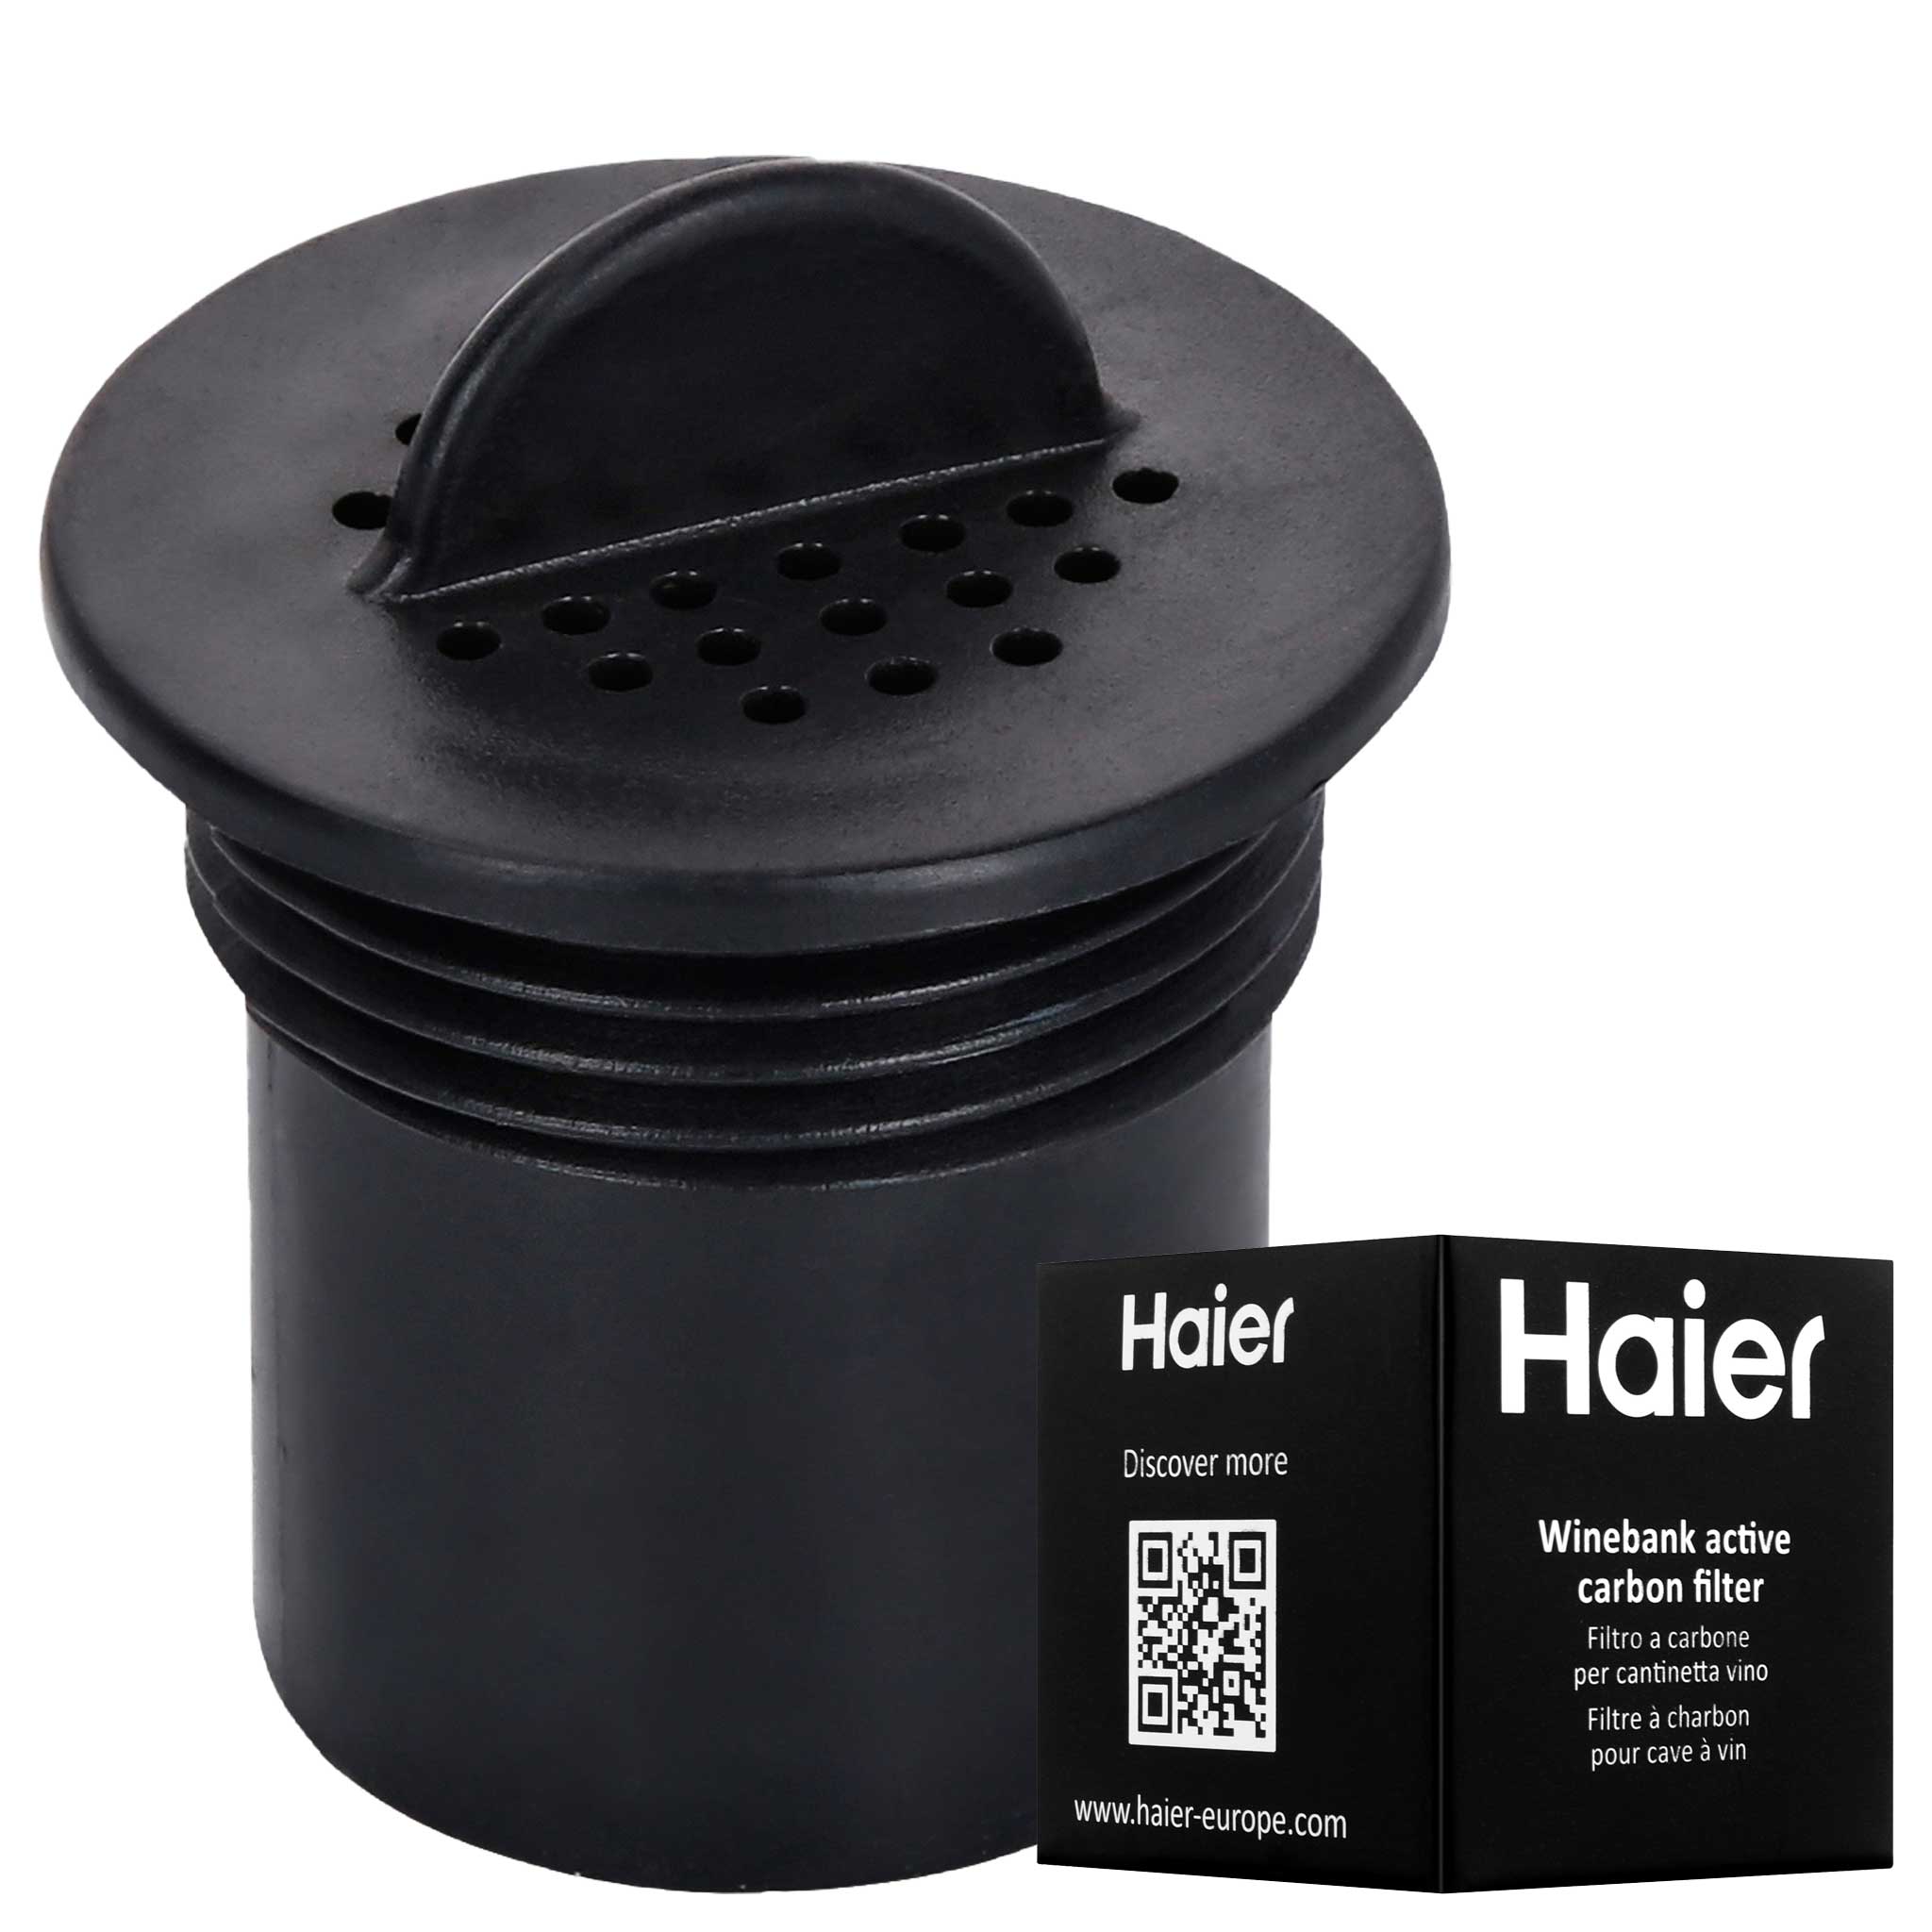 Haier Activated Wine Cellar Carbon Filter, Purifies The Air of The Wine Cellar